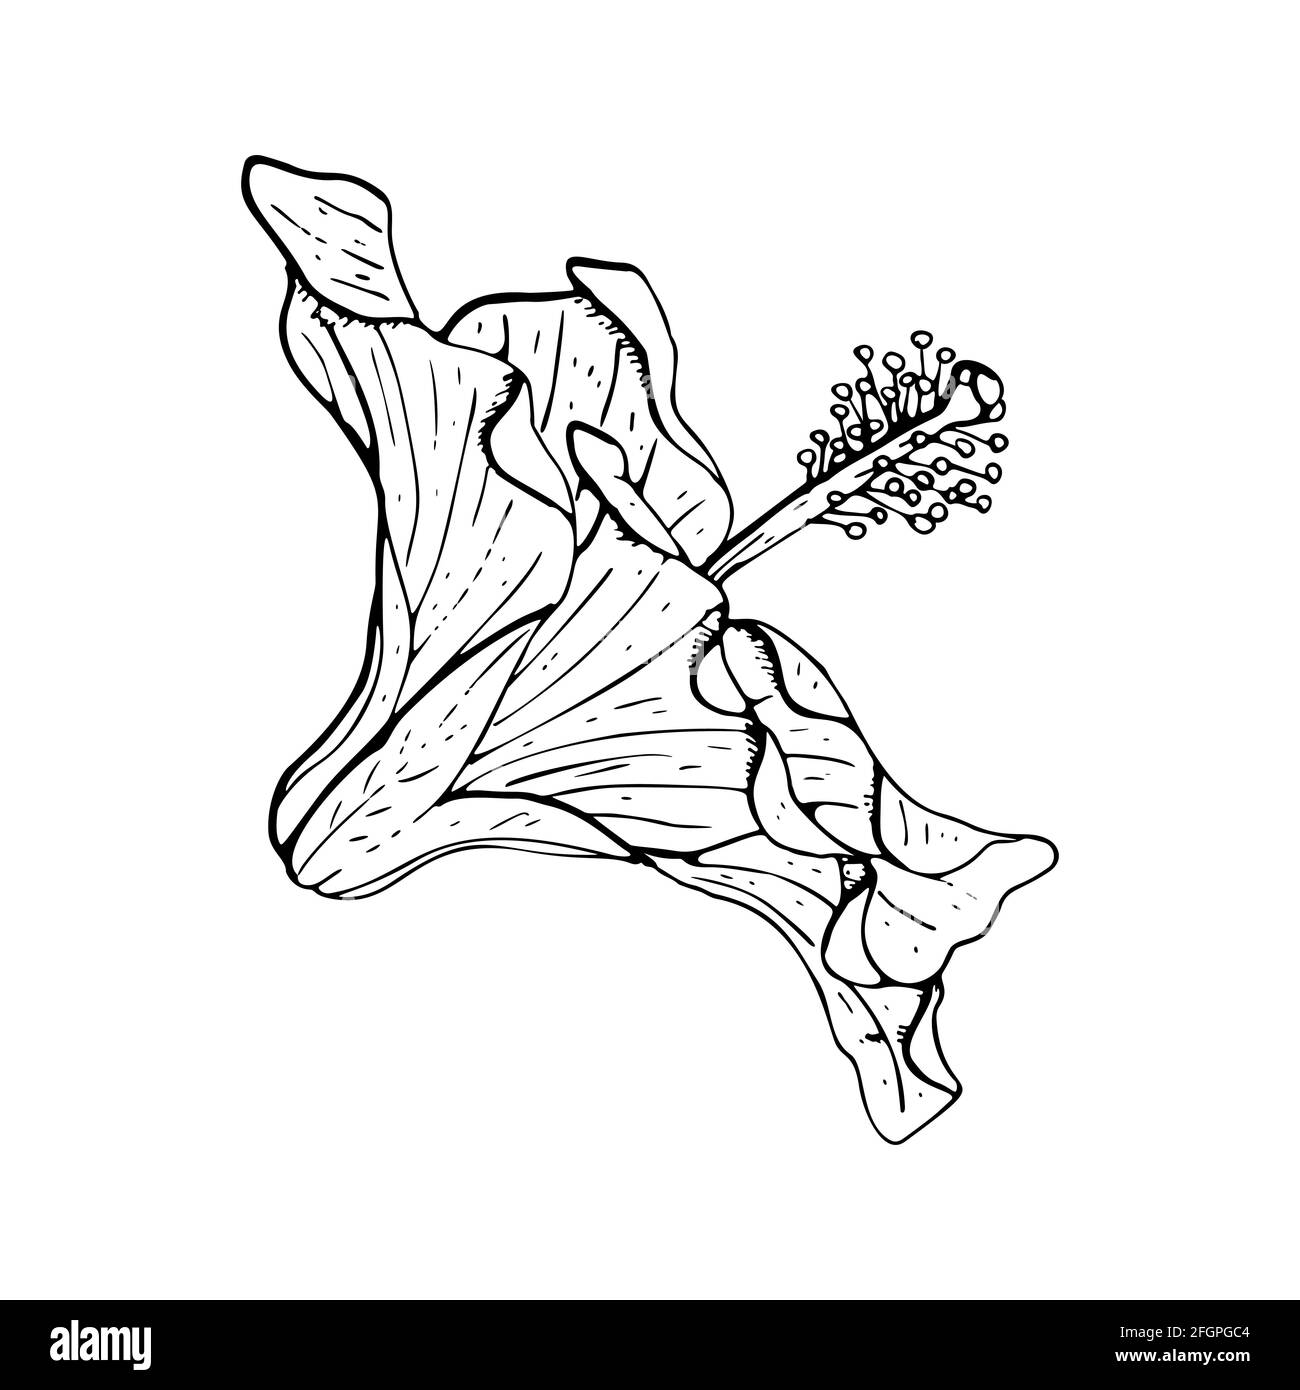 Line art hibiscus flower with black outline isolated on white background. Stock Vector